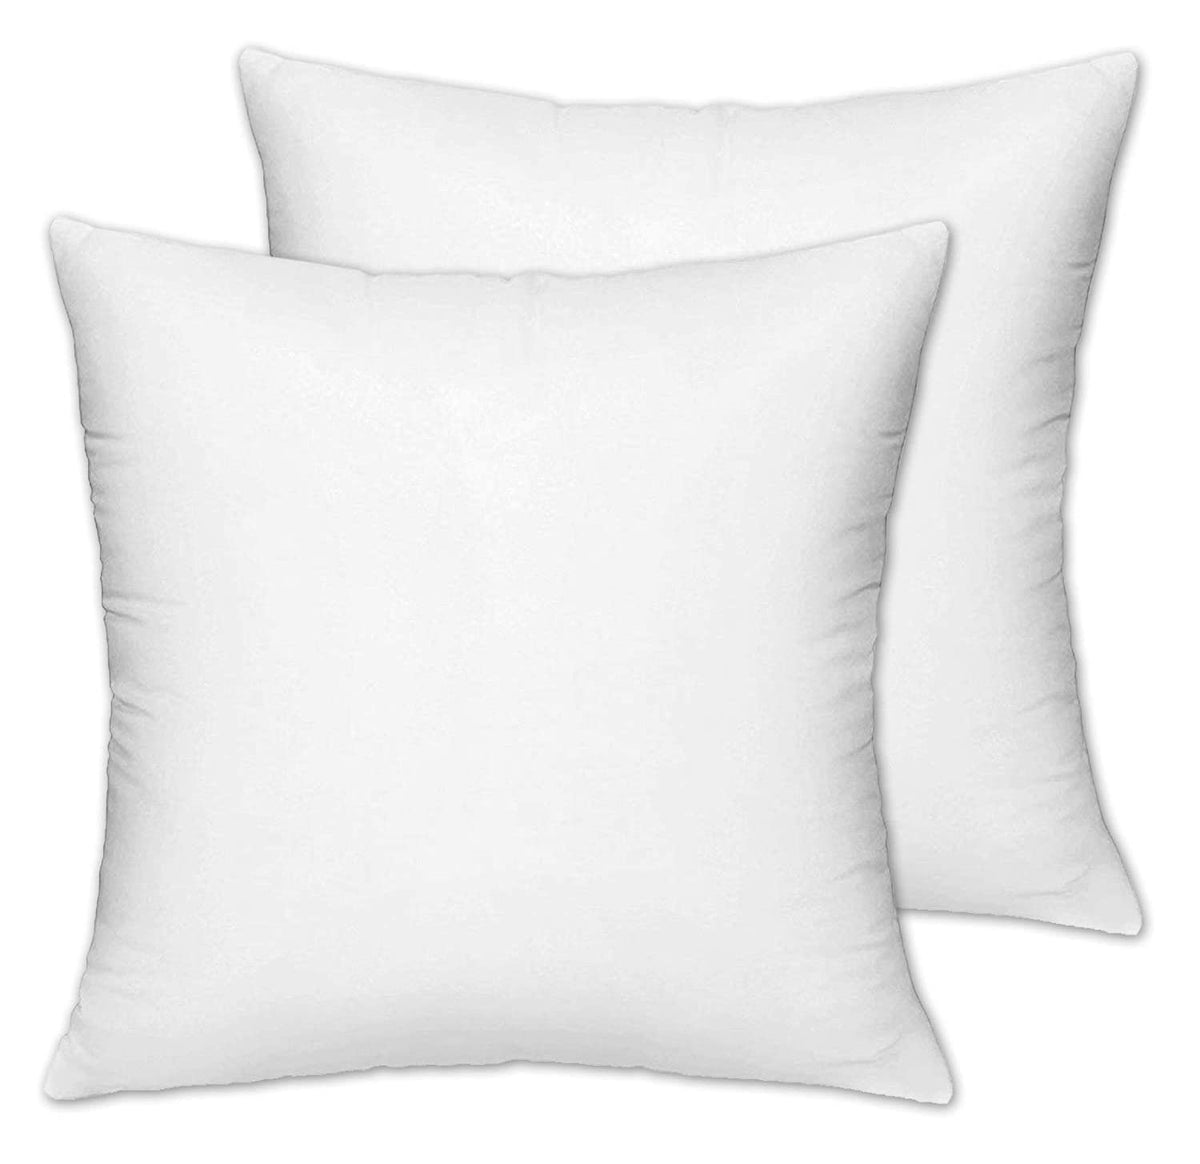 Heart Home Microfiber Square Throw Cushion Filler Bed and Couch Cushion Indoor Decorative Cushion, 12"x12"-Pack of 2 (White)-HS_38_HEARTH21165